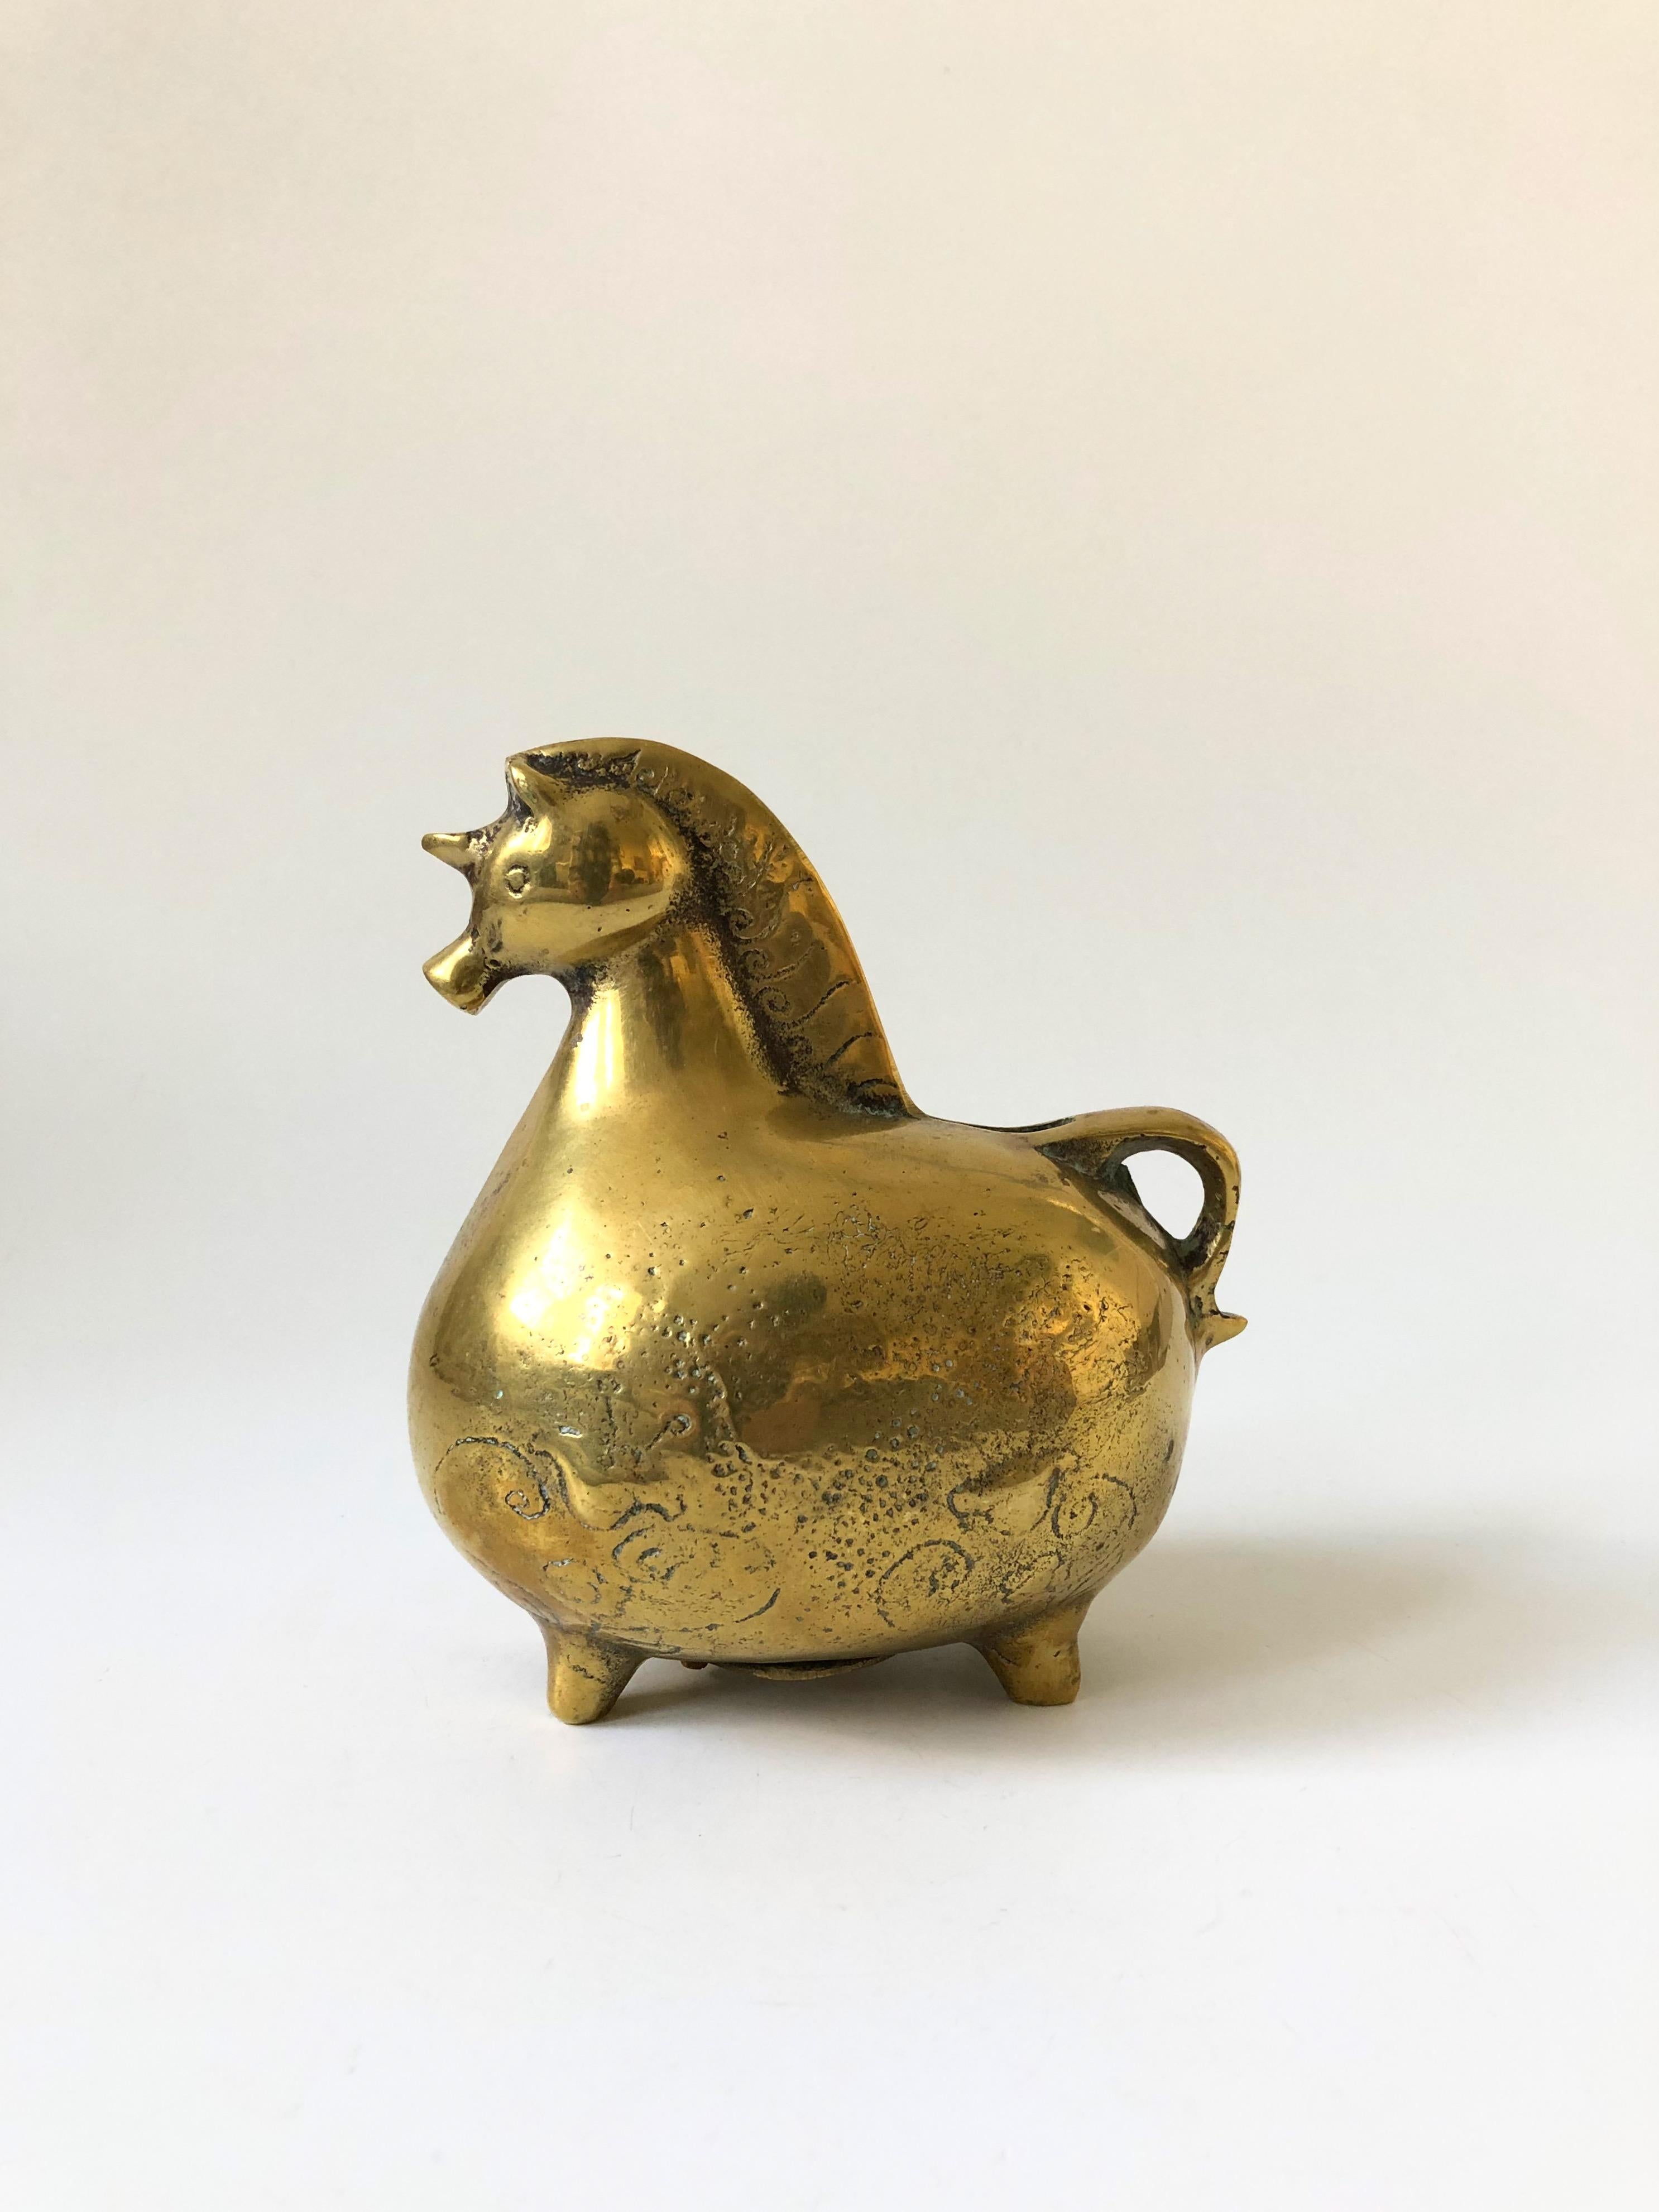 A vintage brass bank in the shape of a unicorn. Adorable rotund shape. A plate on the base unscrews for removing coins.
    